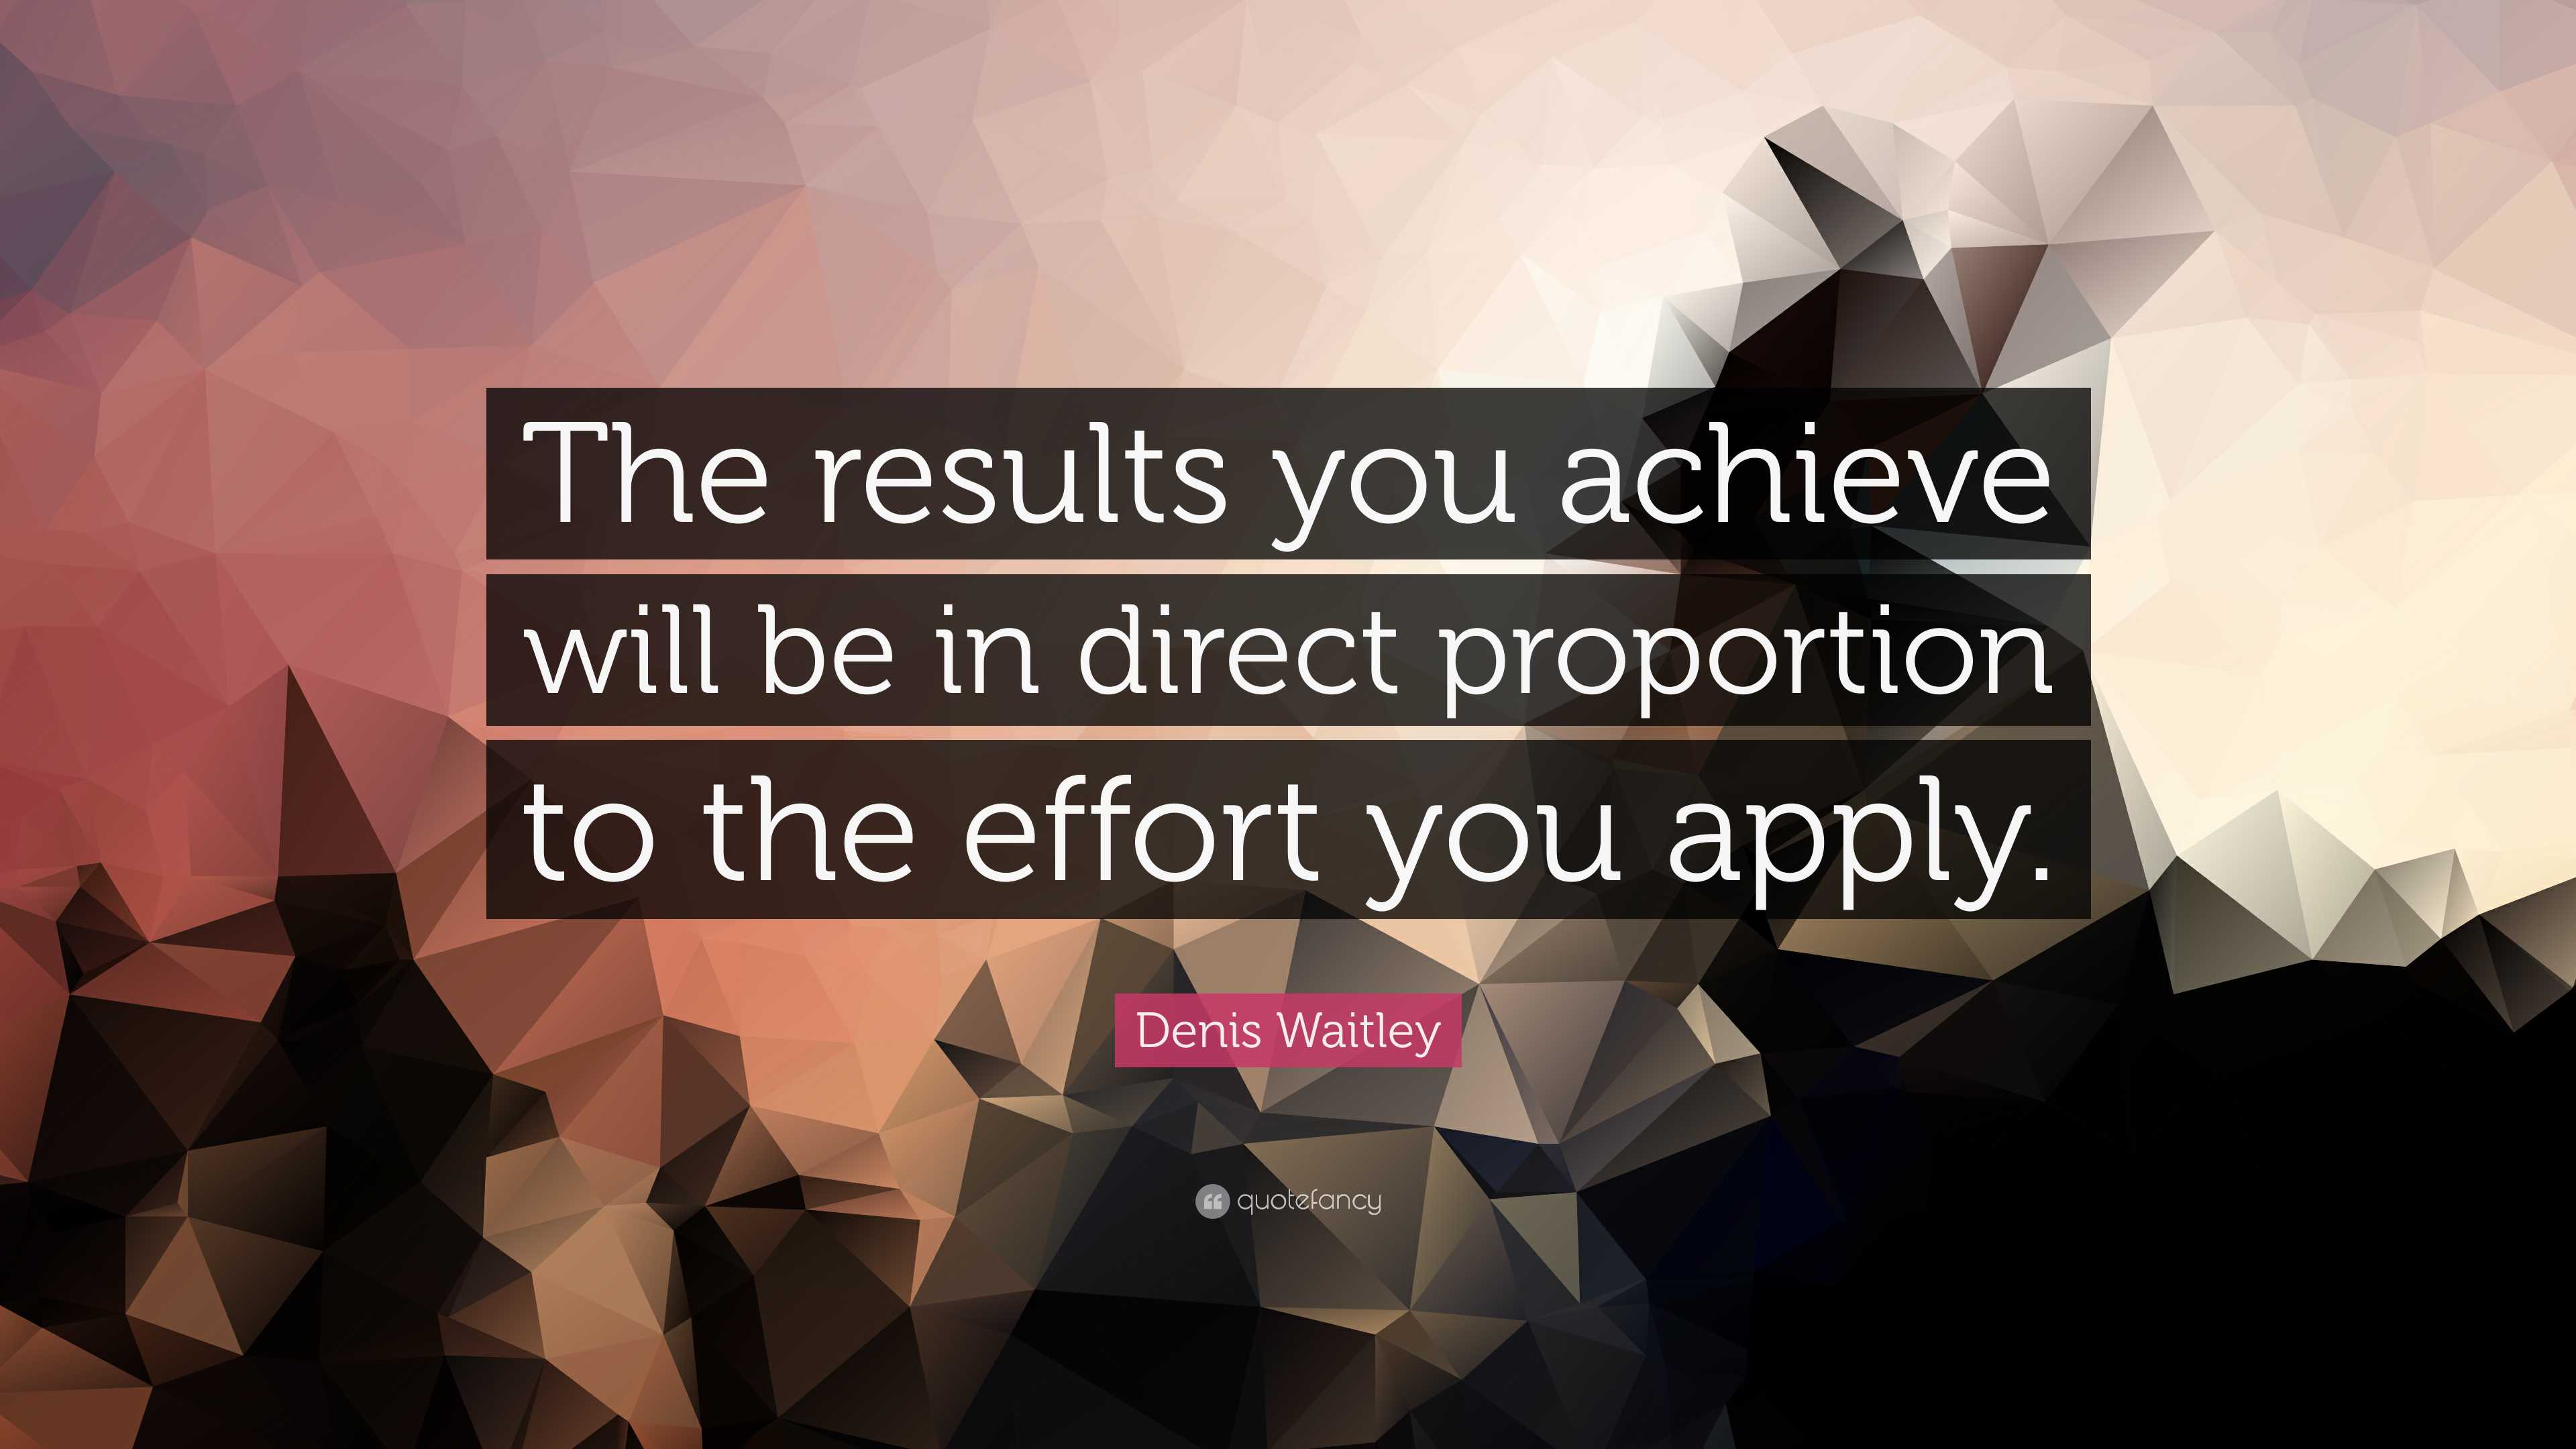 Denis Waitley Quote: “The results you achieve will be in direct ...